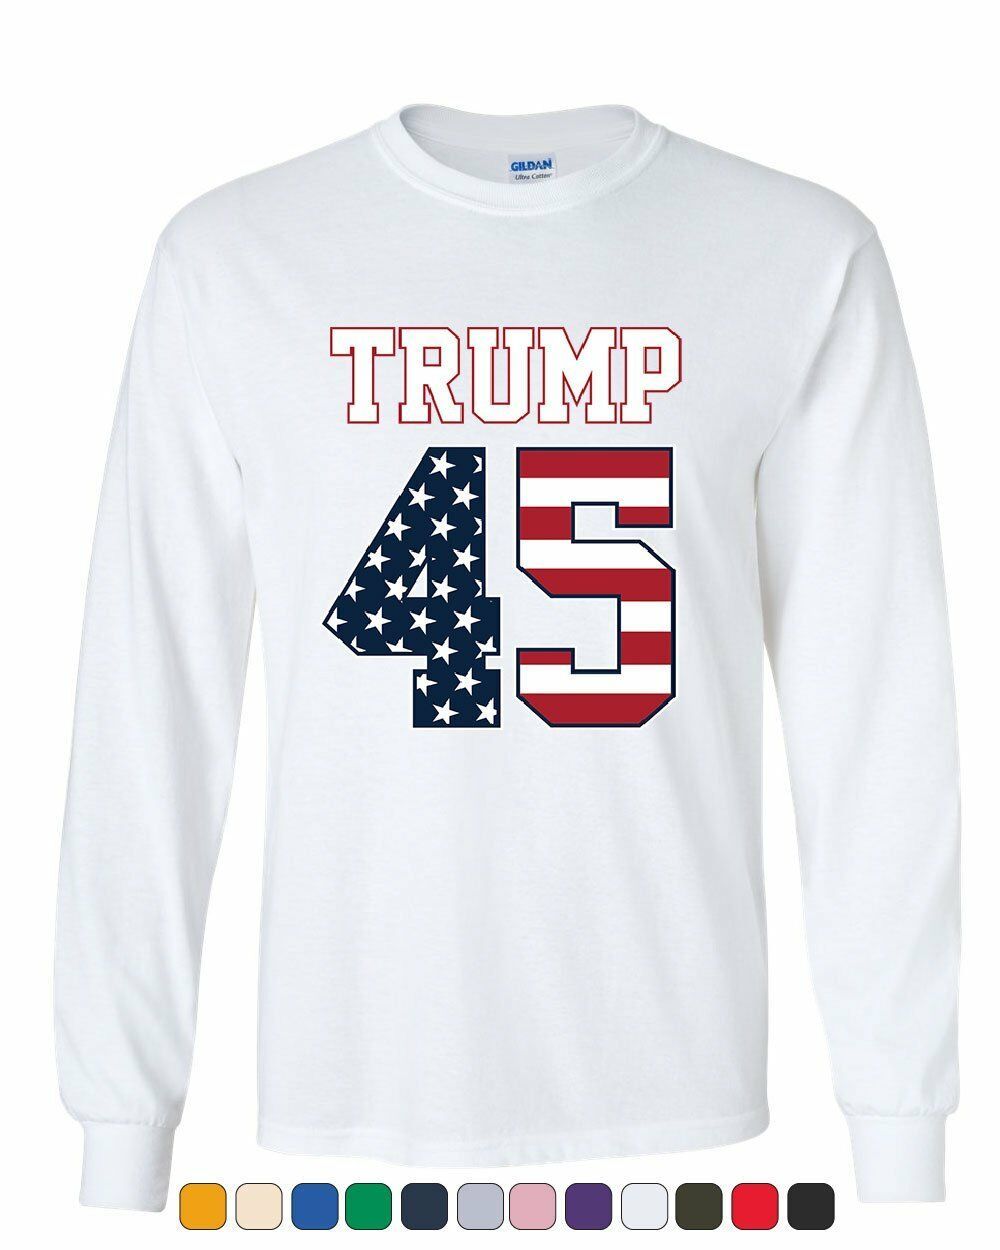 Trump 45 Long Sleeve T-Shirt The 45th President Political Stars and Stripes Tee